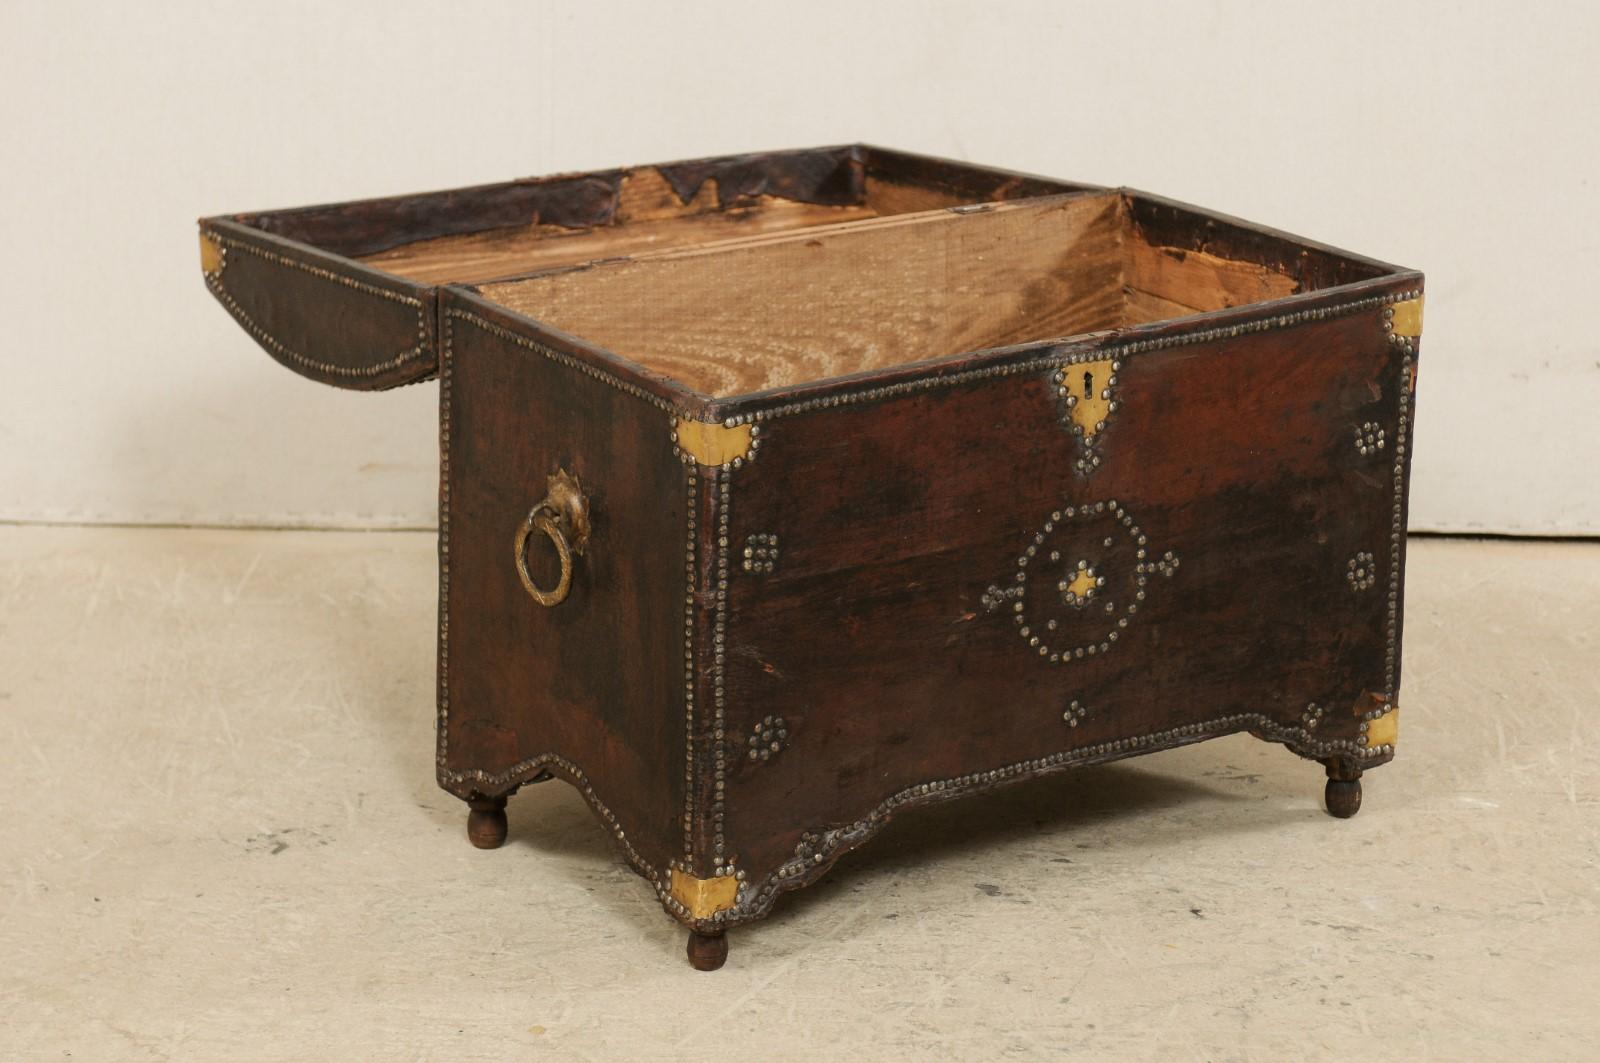 Spanish Leather-Wrapped Domed Coffer with Brass Accents from the 19th Century  For Sale 2